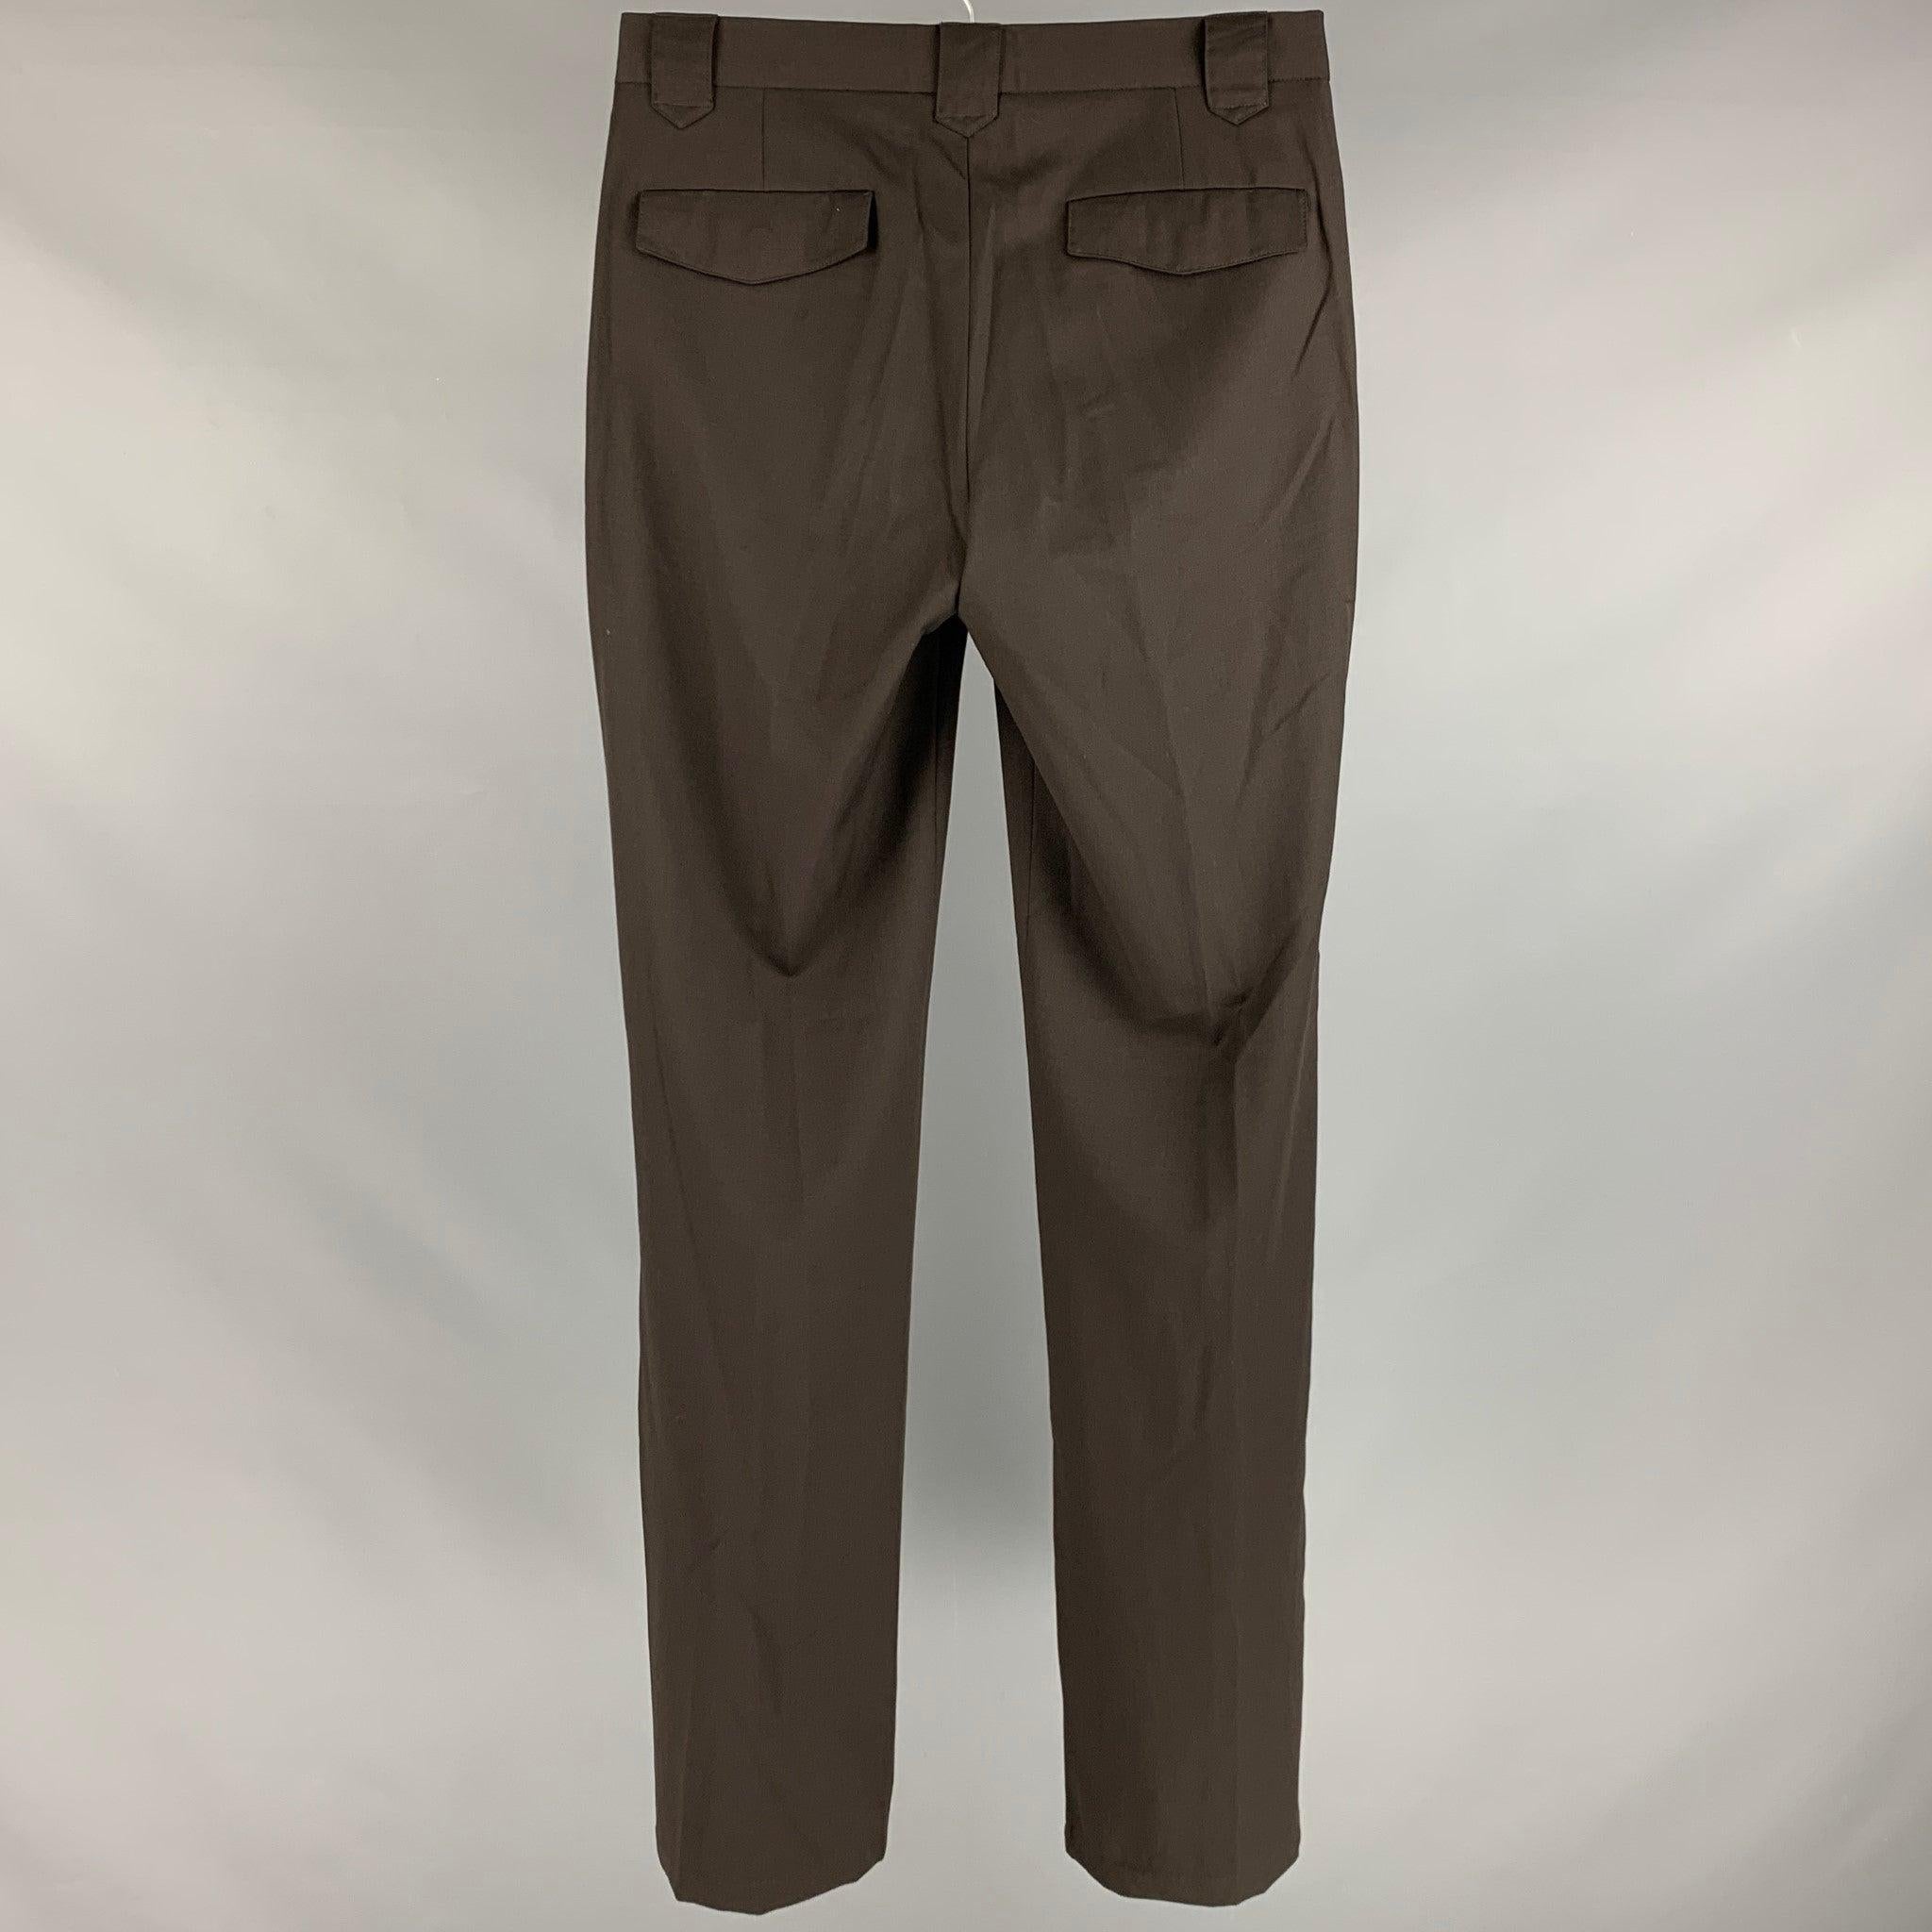 JOHN VARVATOS
dress pants in a brown wool fabric featuring a regular fit, flat front style, and zipper fly closure.Excellent Pre-Owned Condition. 

Marked:  46 

Measurements: 
 Waist: 30 inches Rise: 9 inches Inseam: 34 inches 
 
 
Reference: